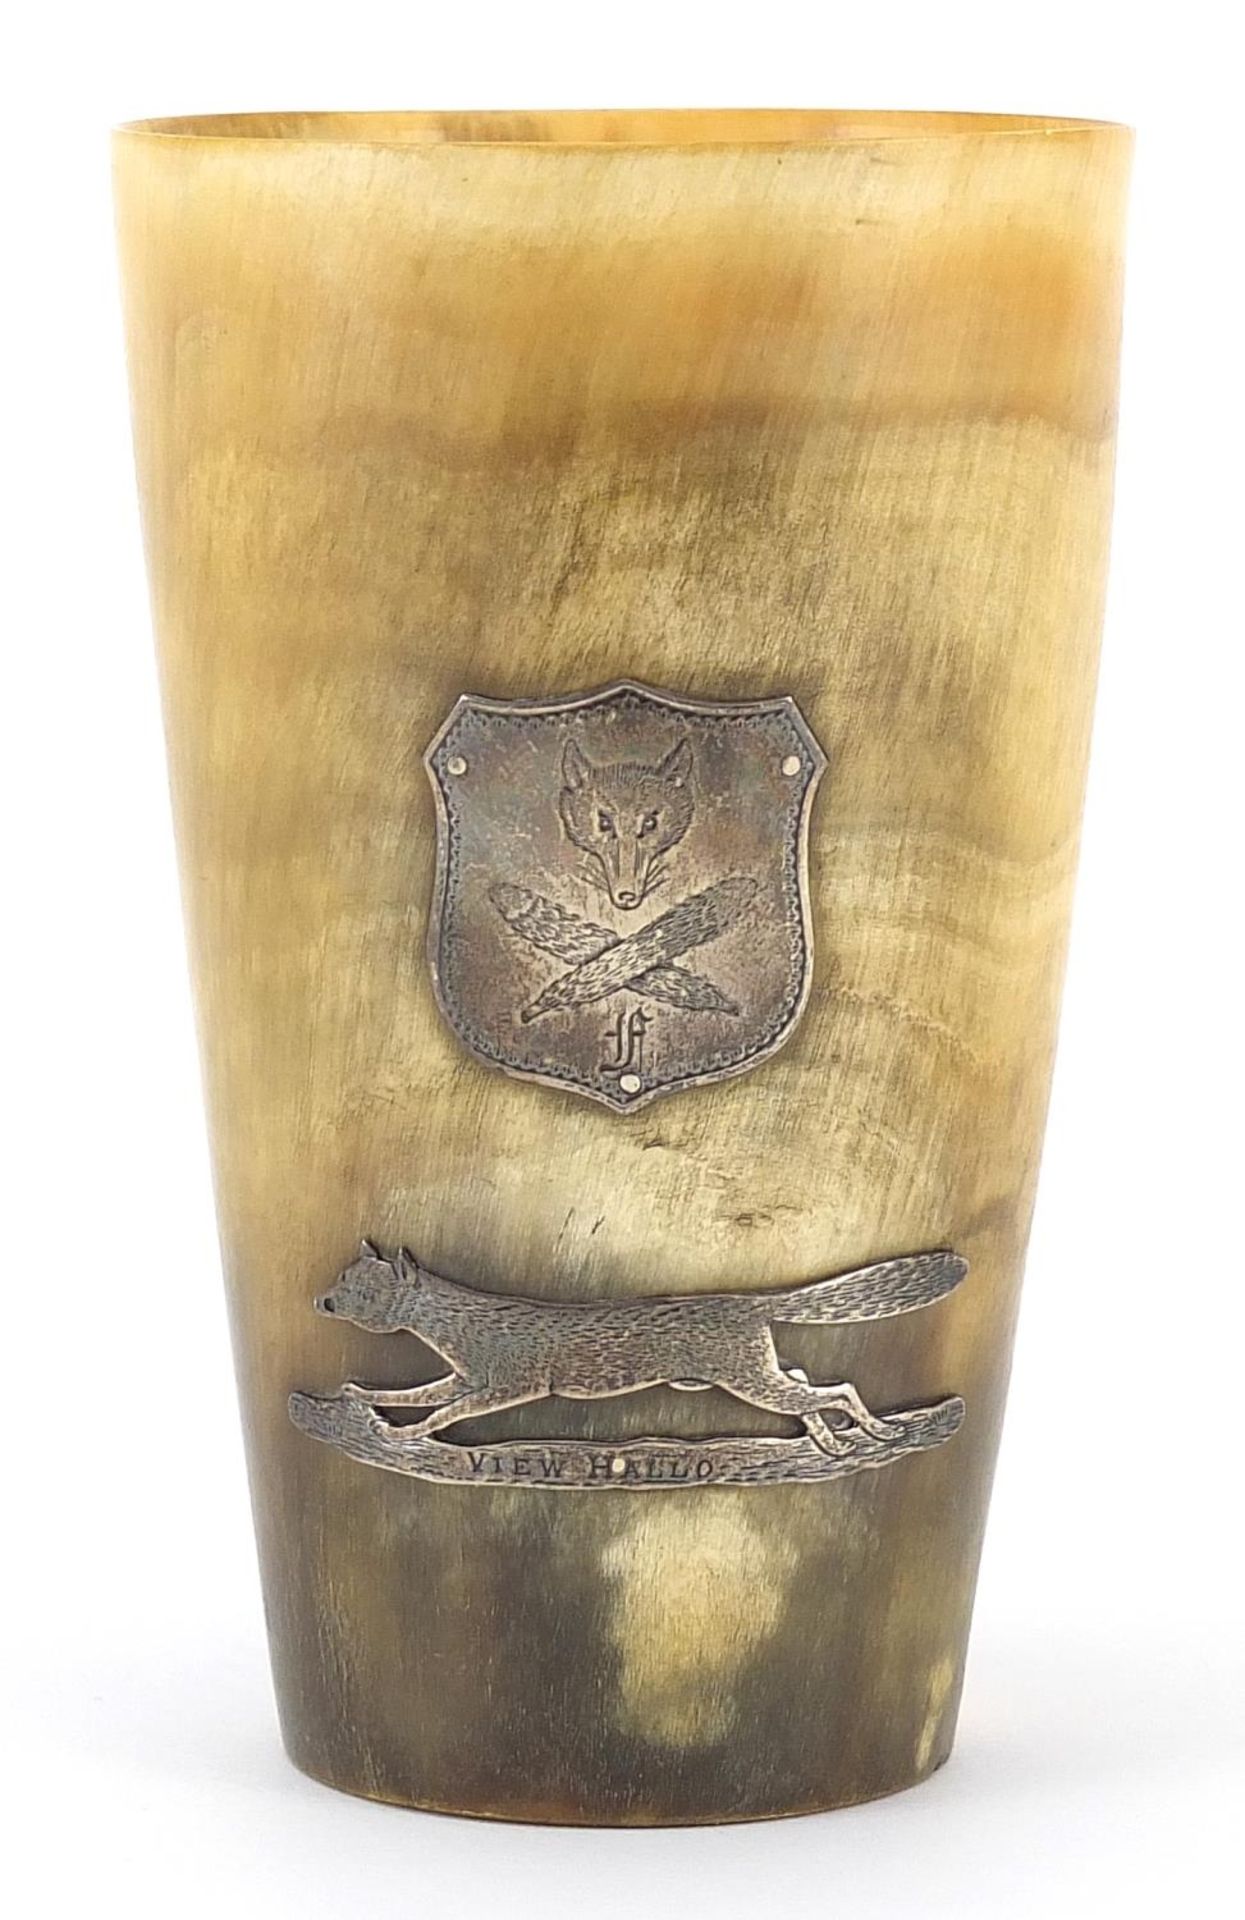 19th century horn hunting beaker with applied silver fox and crest, engraved View Hallo, 12cm high